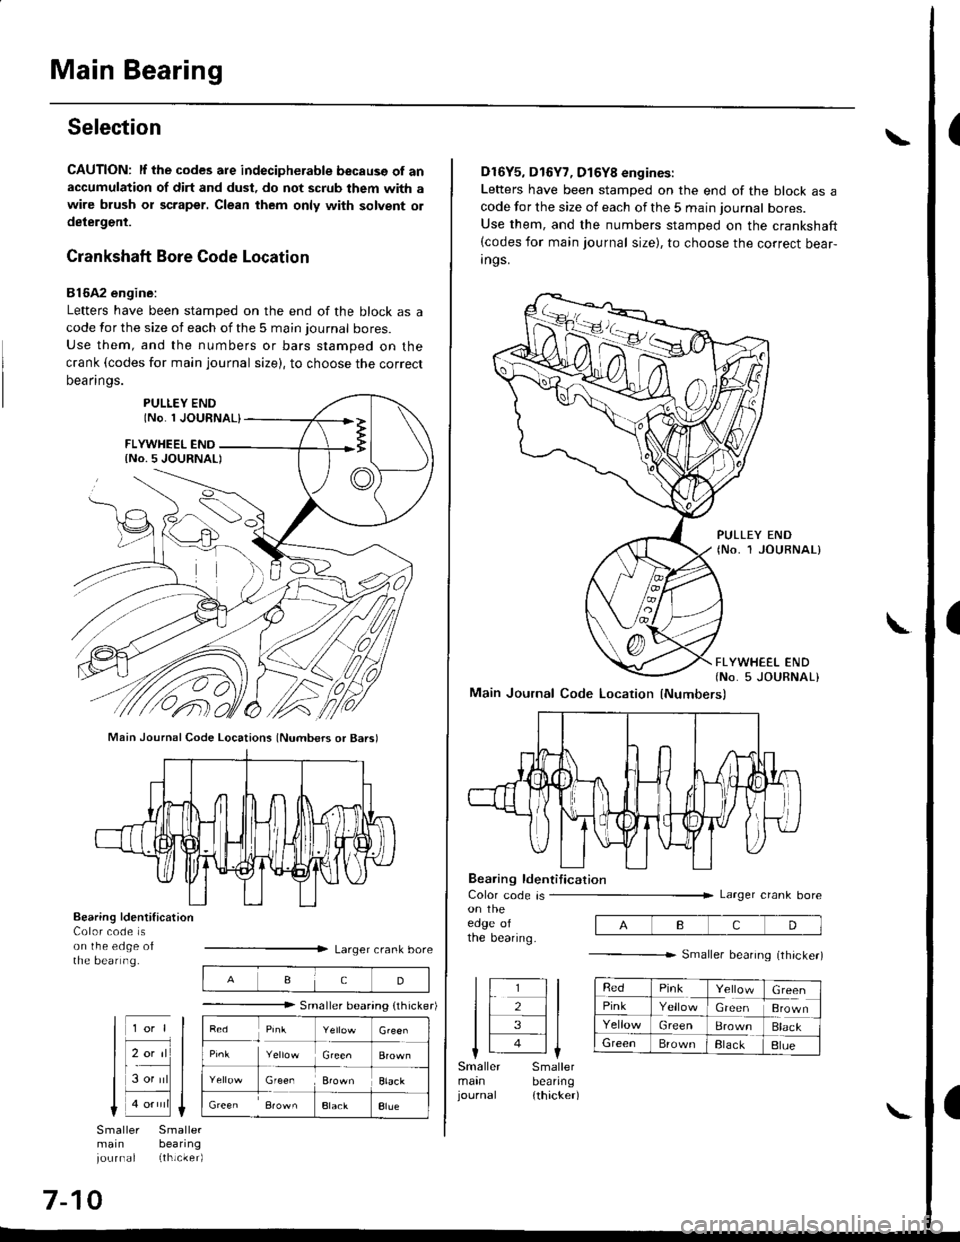 HONDA CIVIC 1998 6.G Workshop Manual Main Bearing
Selection
CAUTION: lf the codes are indecipherable because of anaccumulation of dirt and dust, do not scrub them with a
wire brush or scraper. Clean them only with solvent ol
deiergent.
C